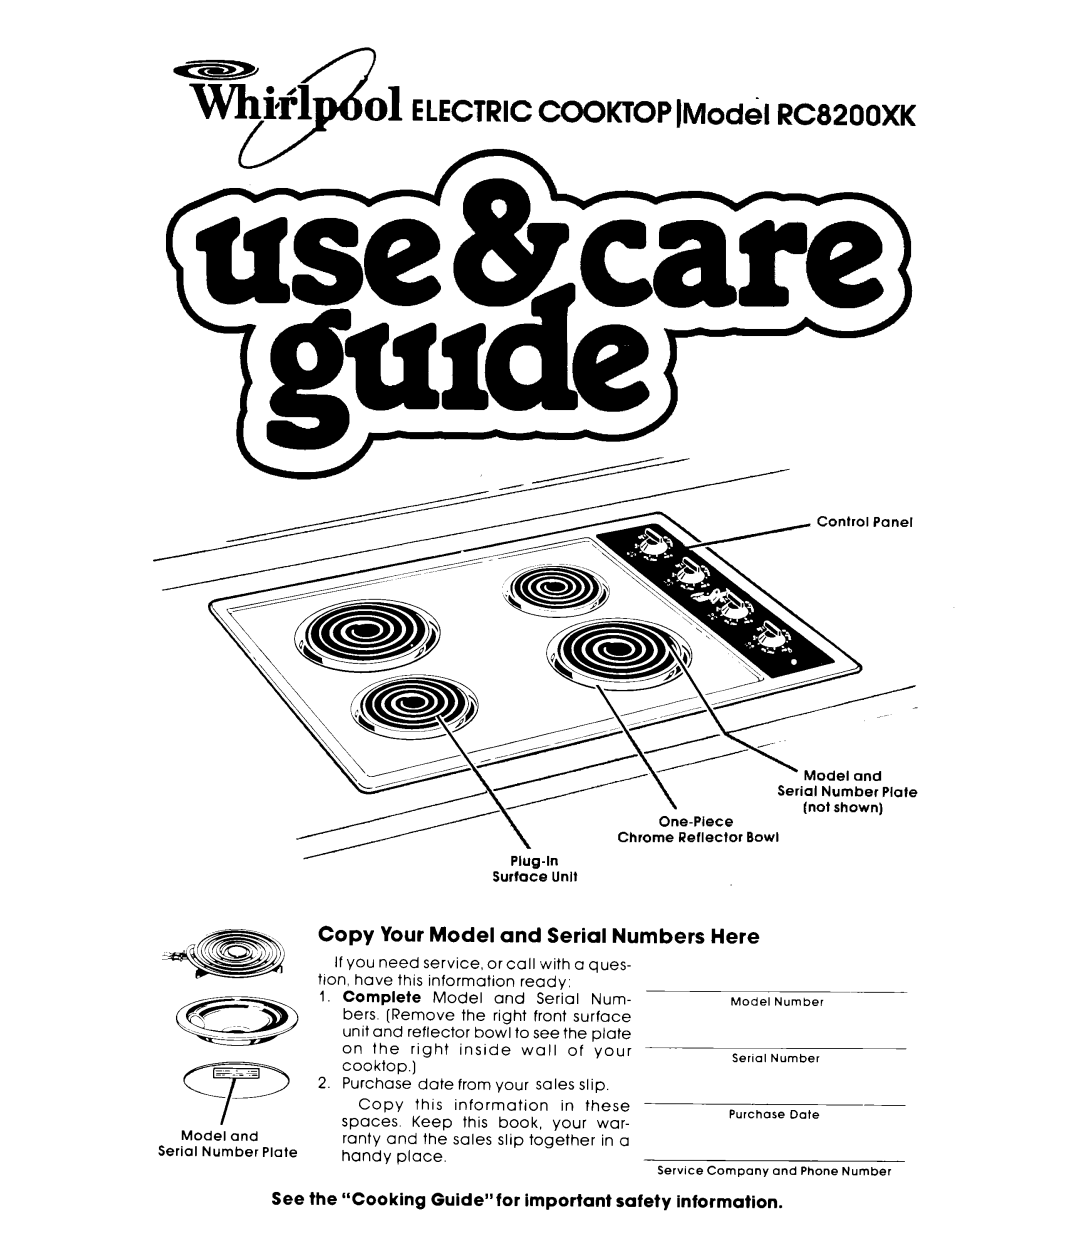 Whirlpool manual Copy Your Model and Serial Numbers Here, ELECTRICCOOKTOP lModil RC8200XK 